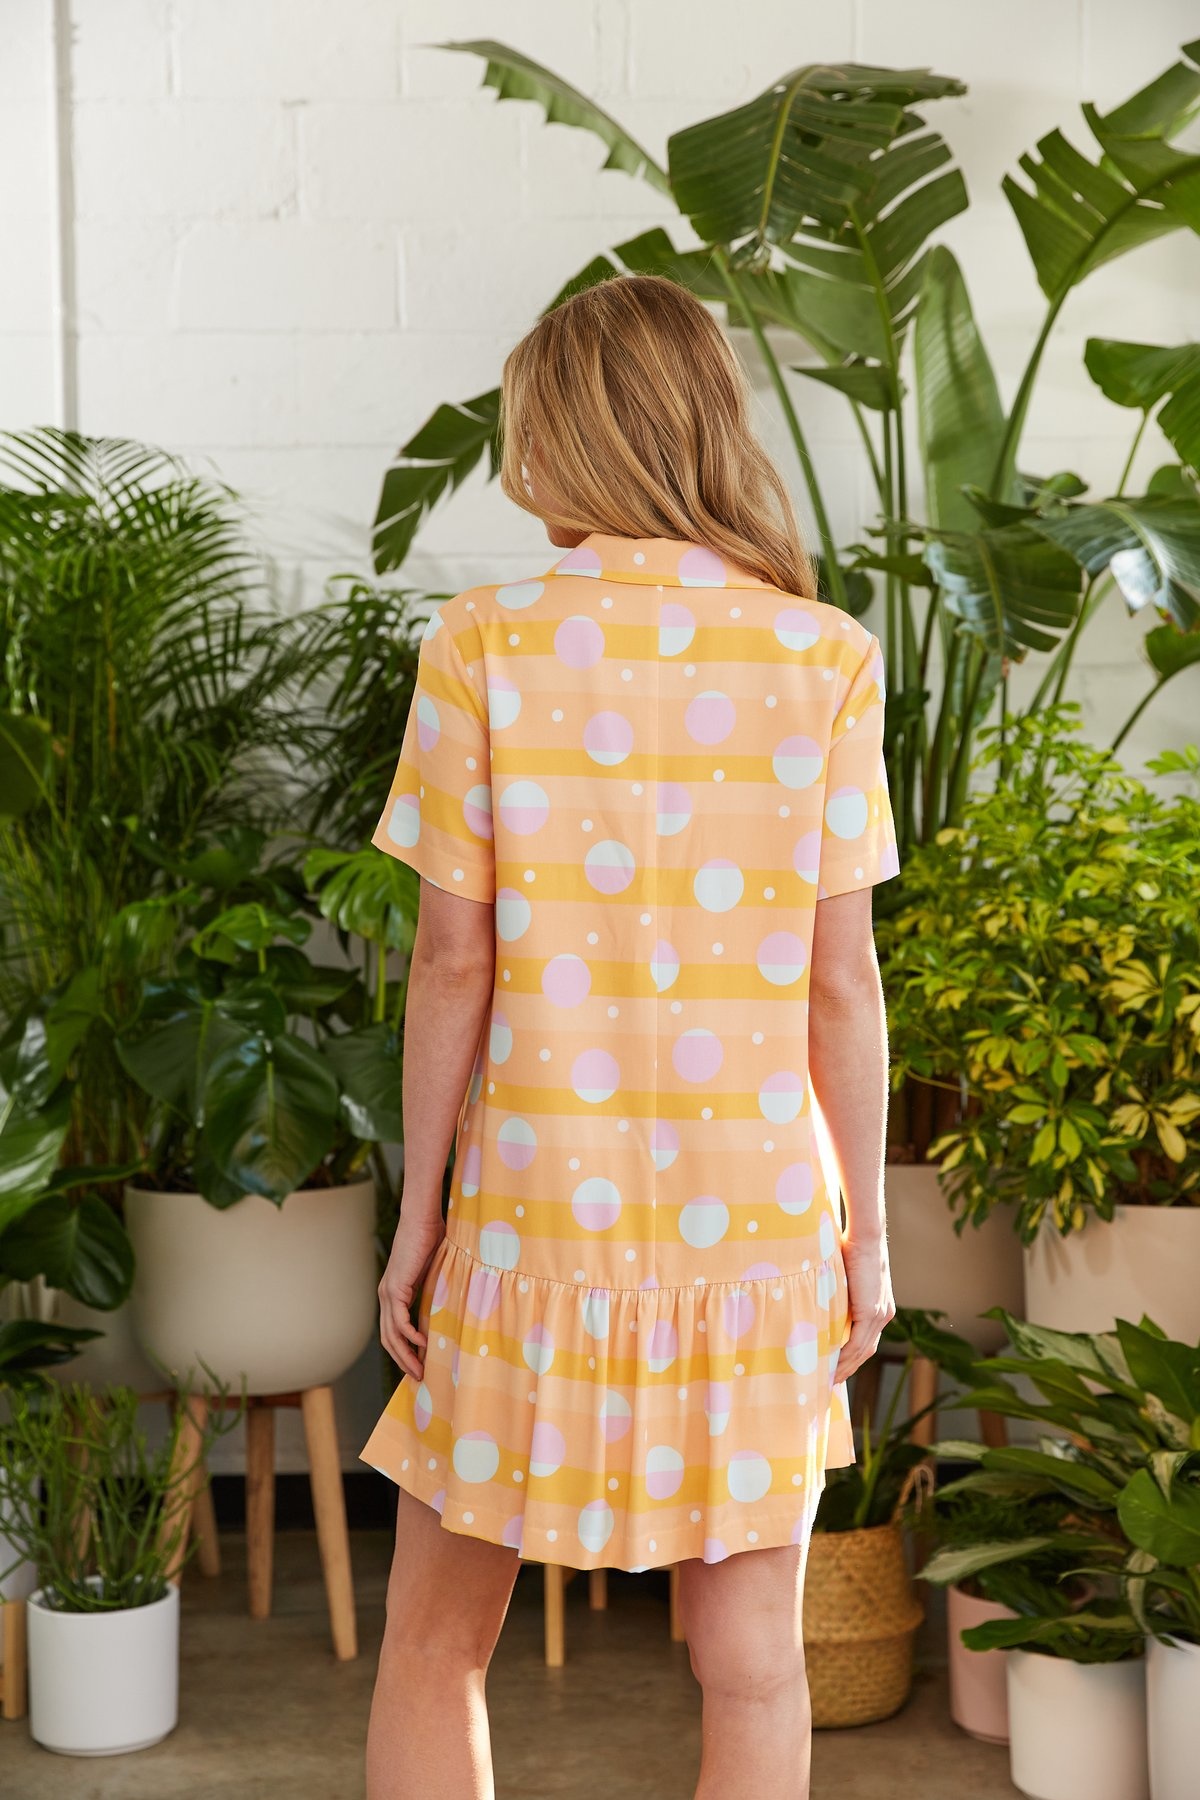 Crosby By Mollie Burch Calee Dress in African Sunset